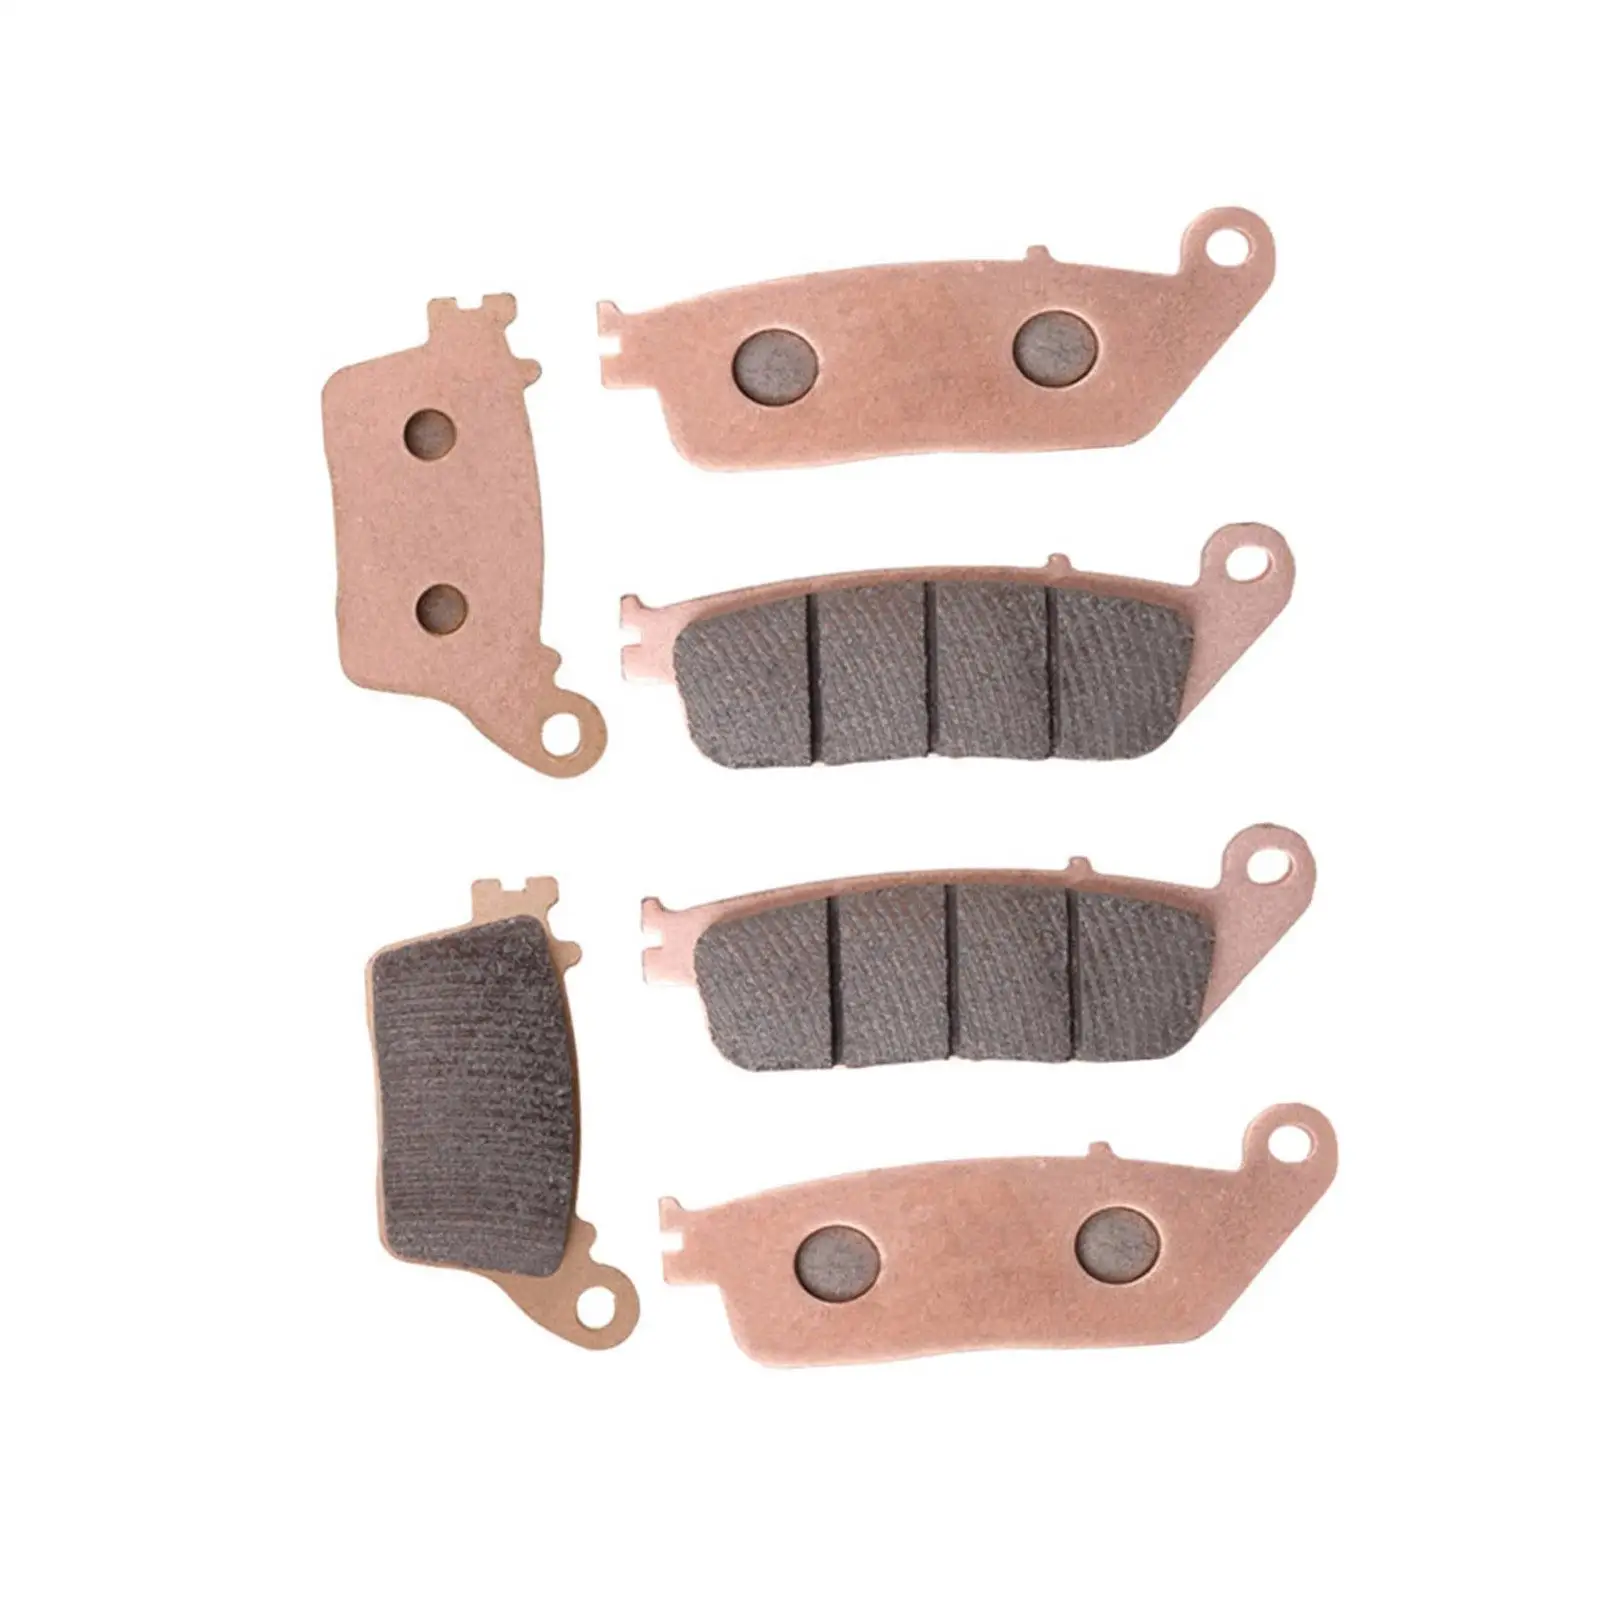 6x Front and Rear Brake Pads Motorcycle Replacement Part for Honda